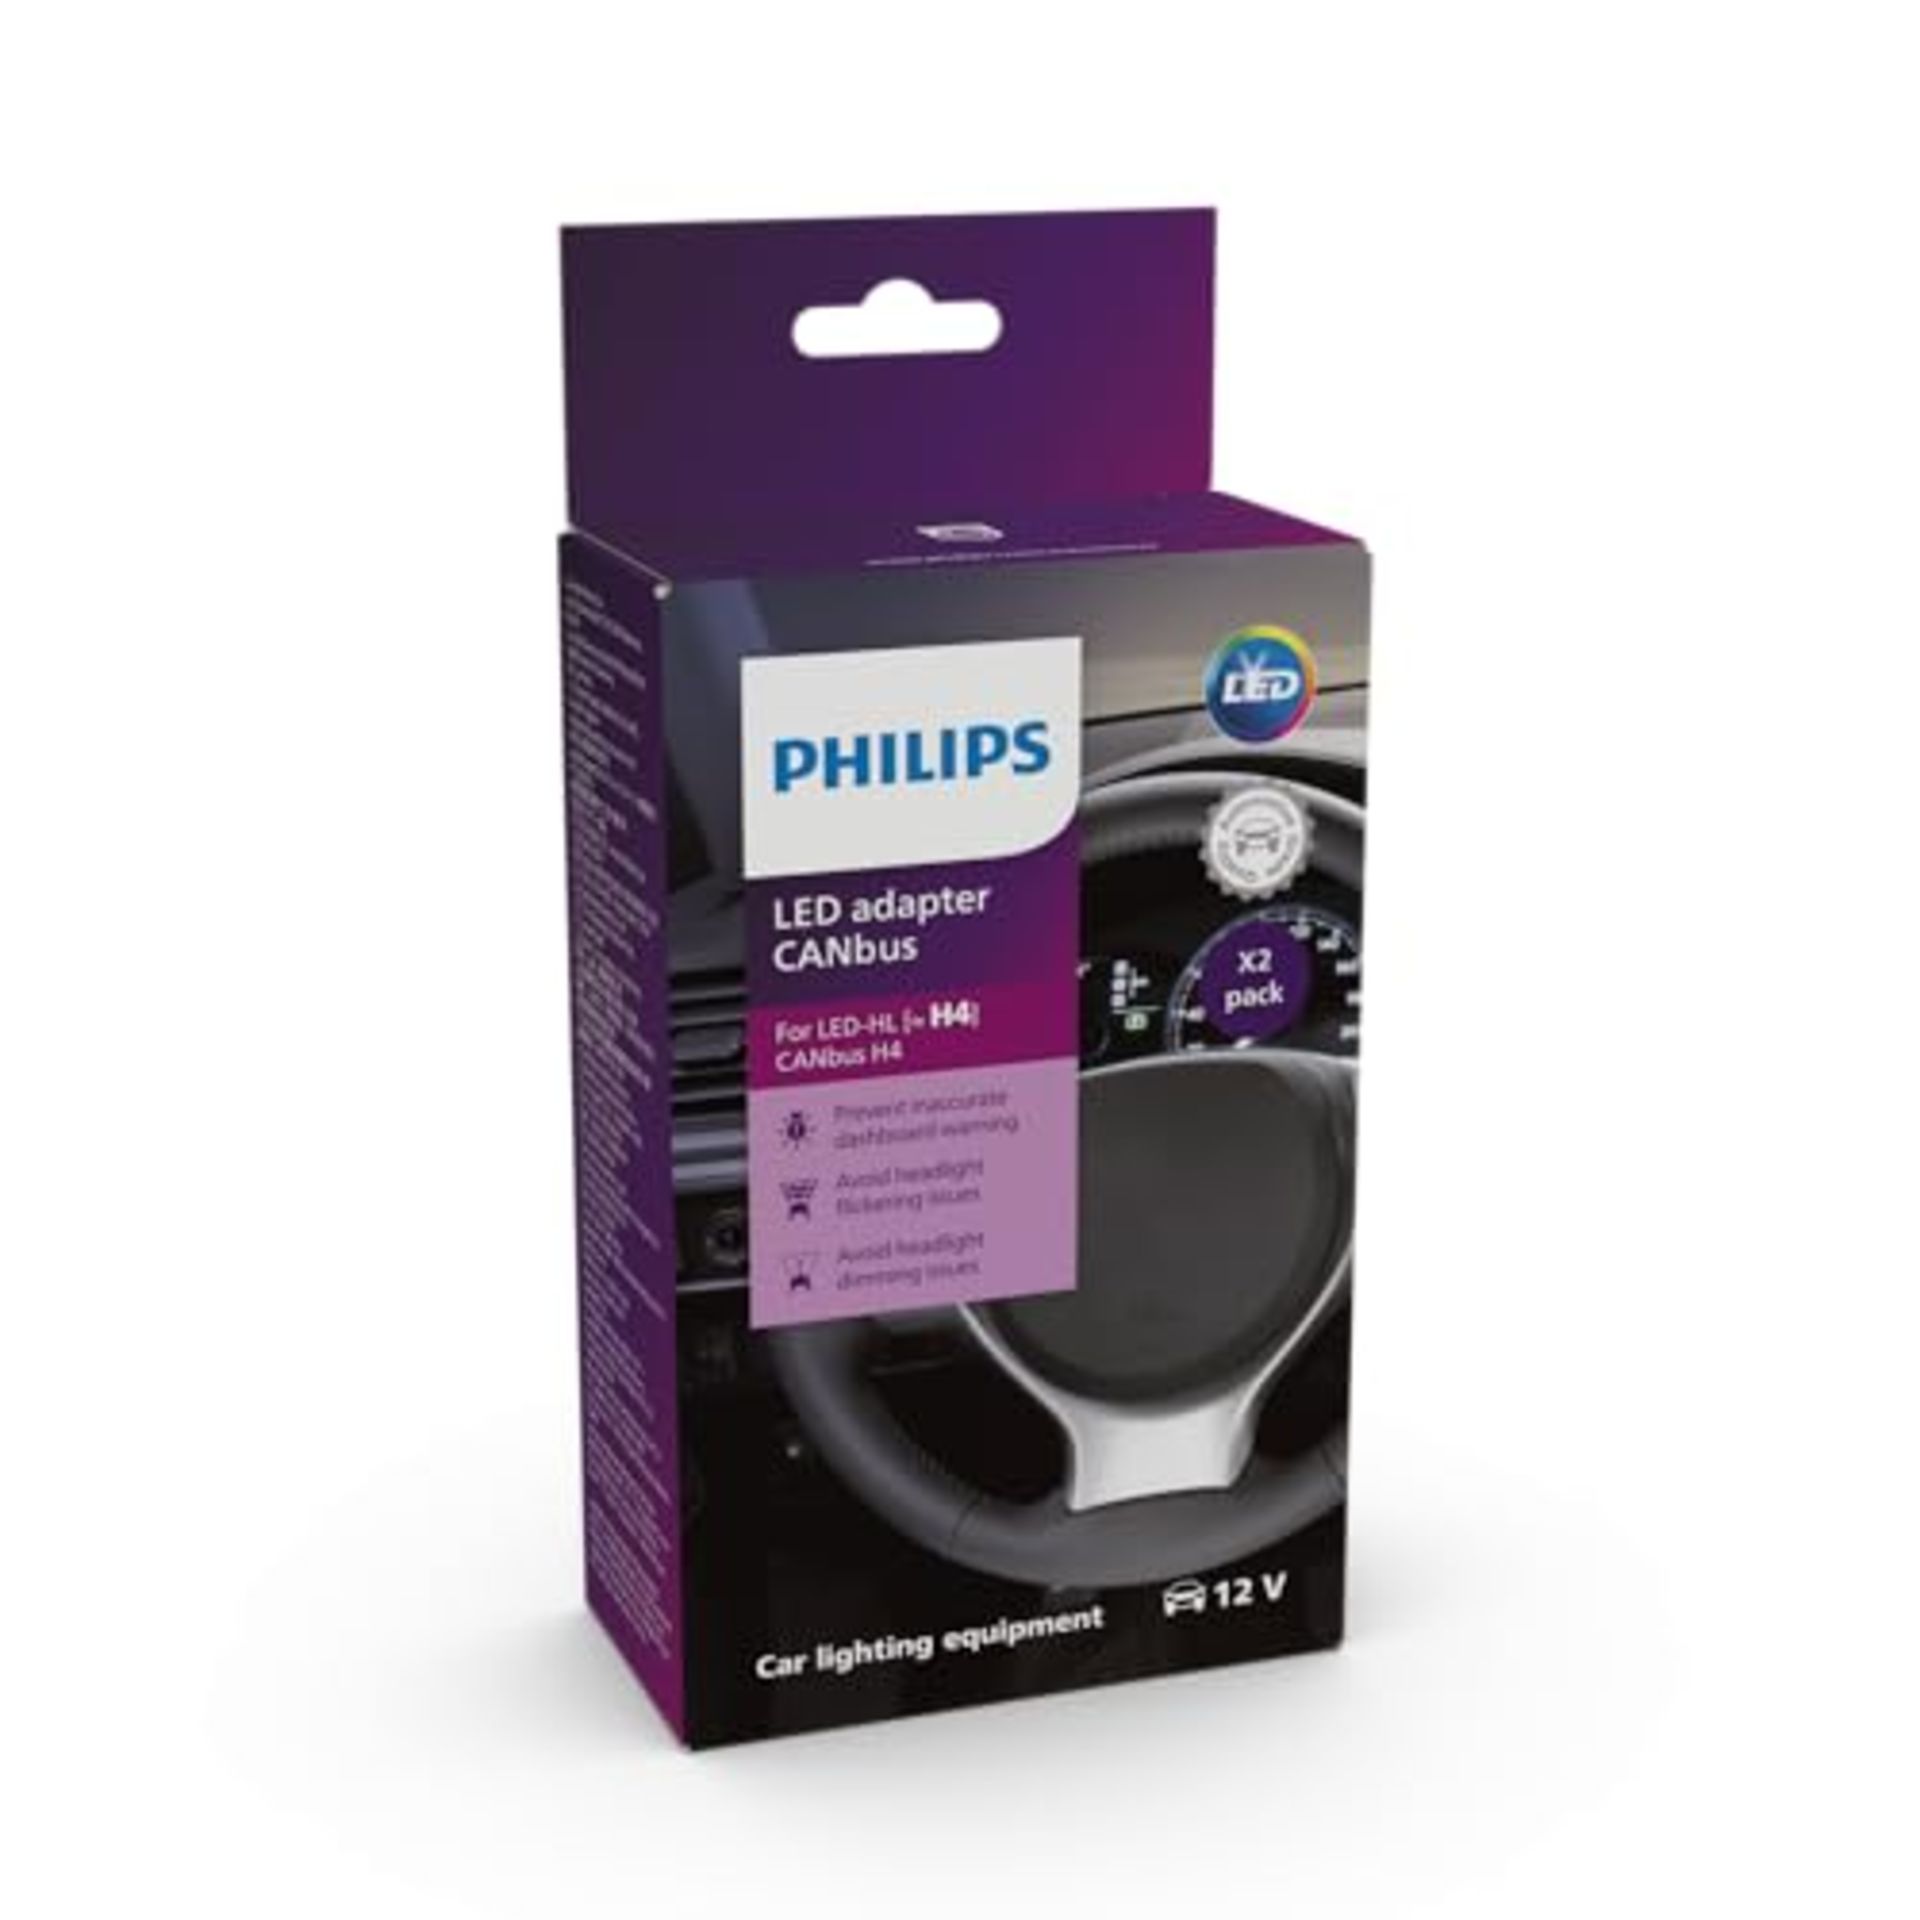 CANBus adapter for Philips Ultinon Pro6000 H4-LED, 3-in-1 solution, prevents warning m